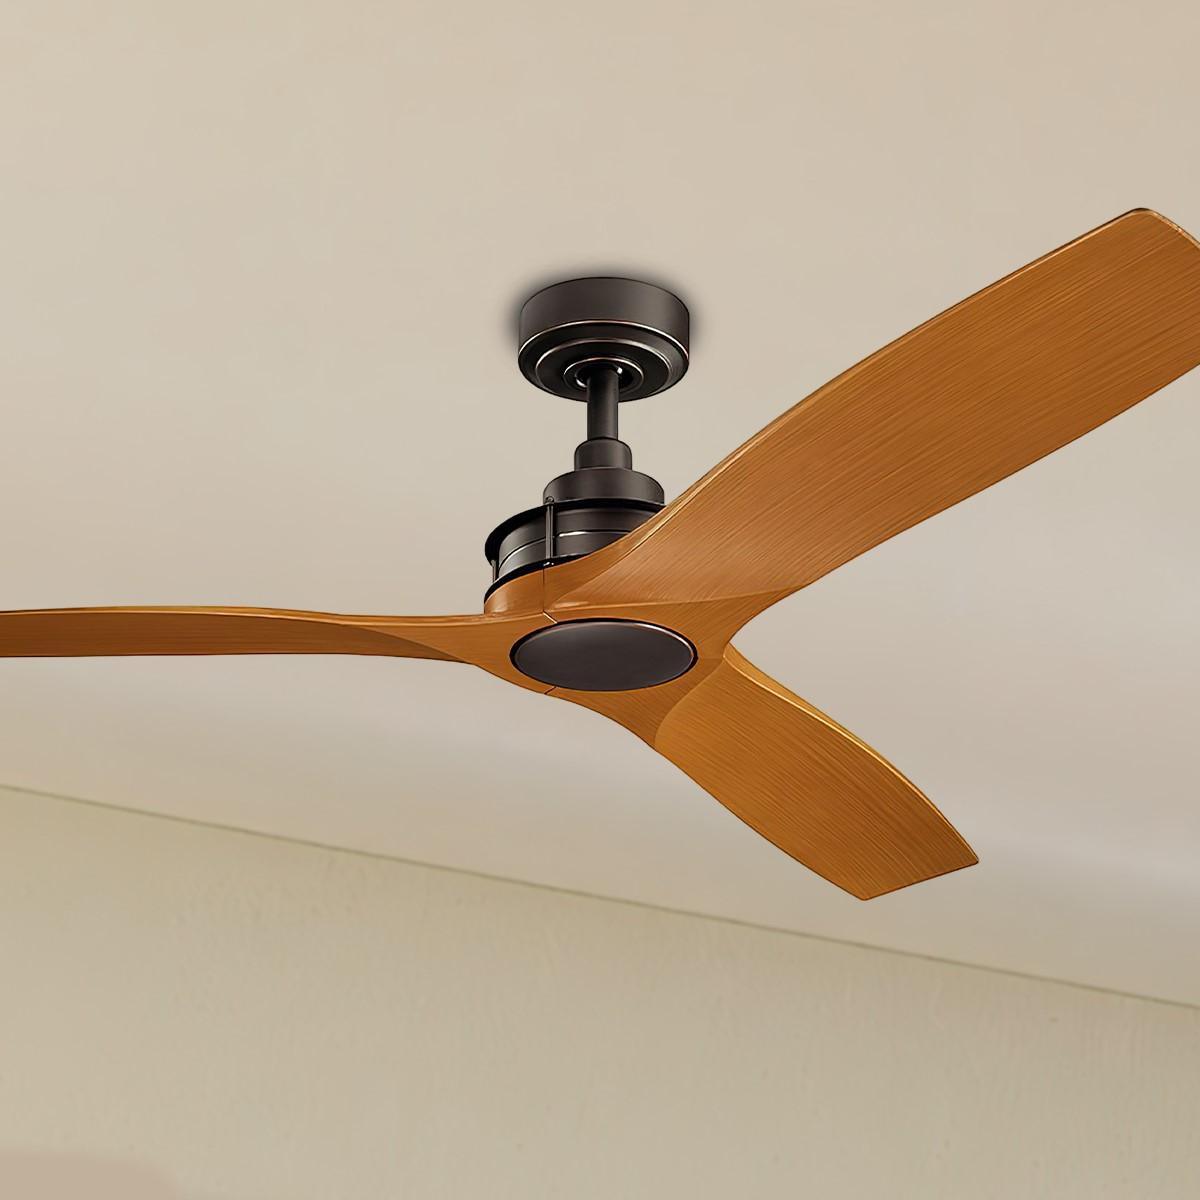 Ried 56 Inch Propeller Outdoor Ceiling Fan With Wall Control - Bees Lighting